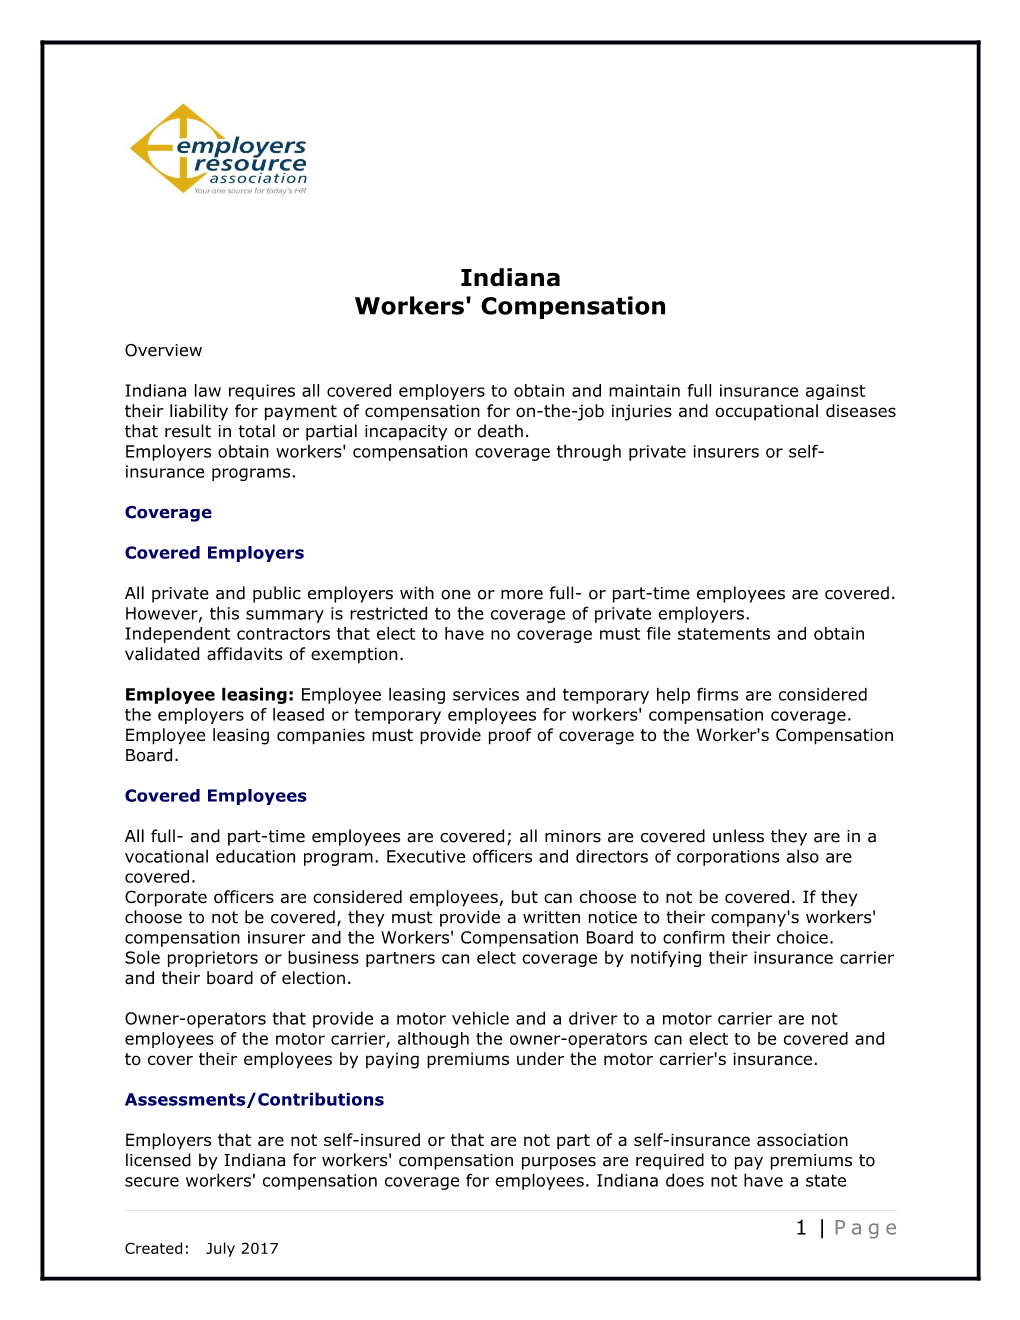 Workers' Compensation s1